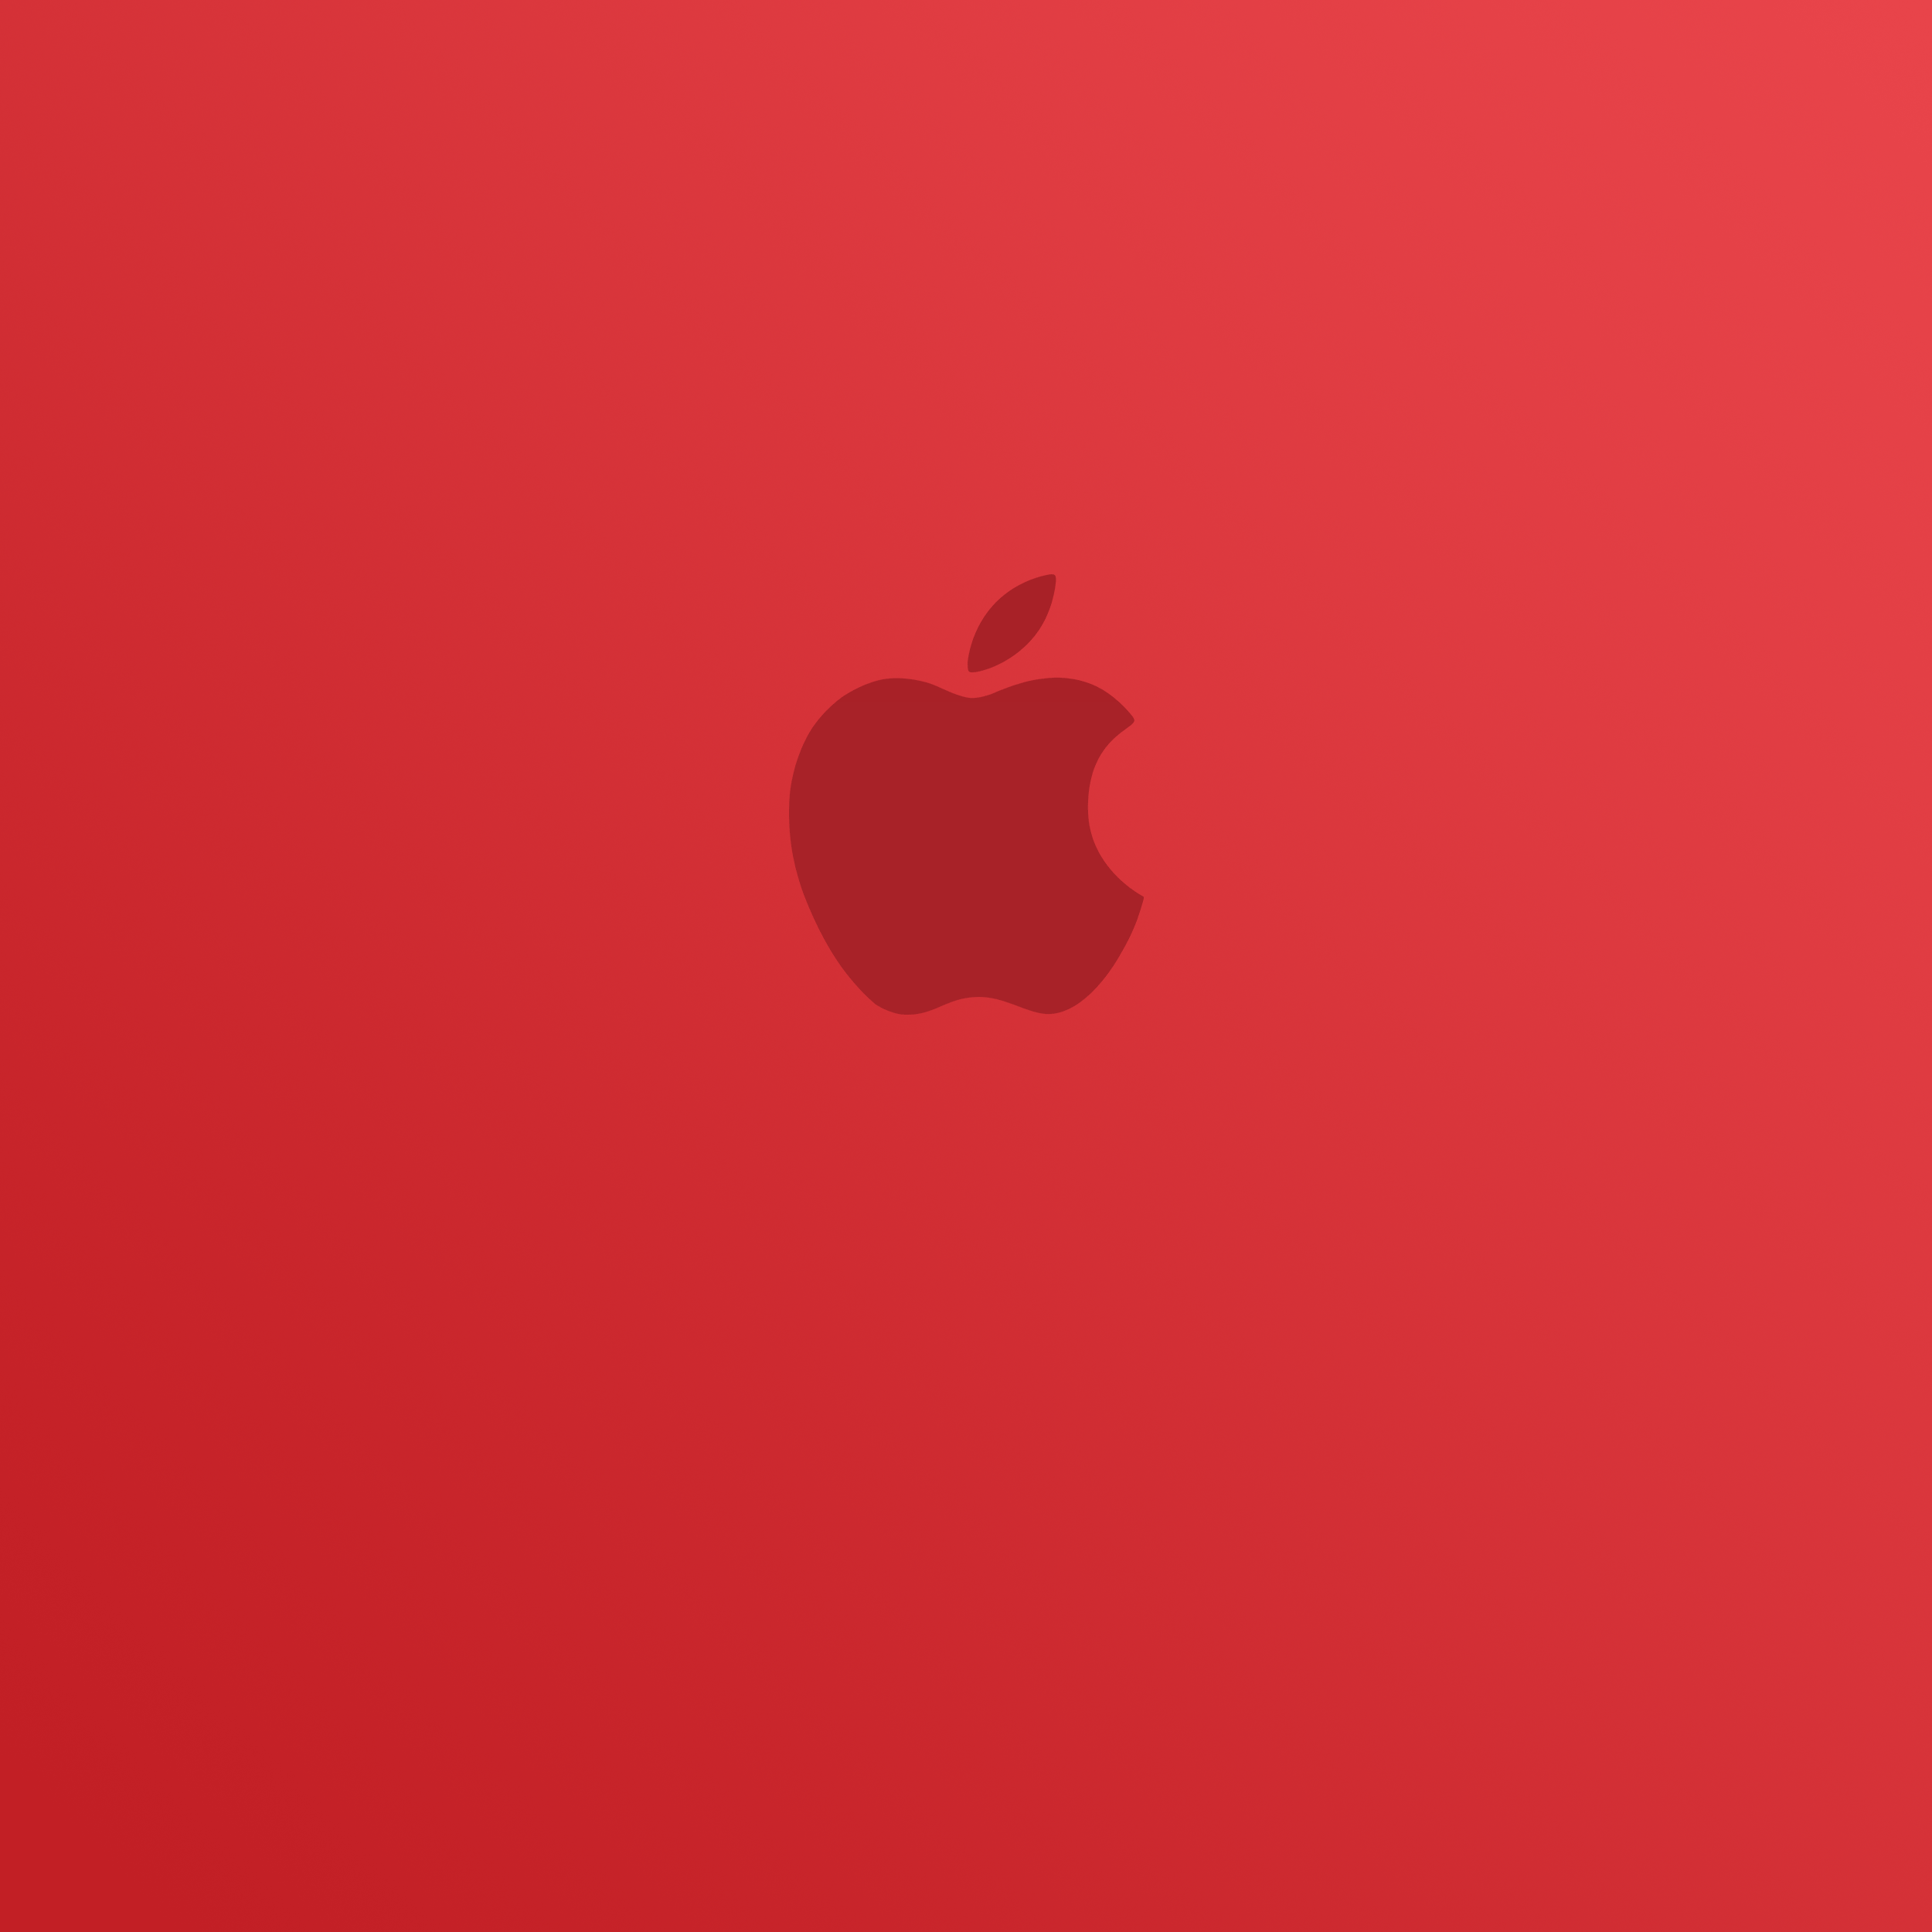 World AIDS Day Product (RED) inspired wallpaper